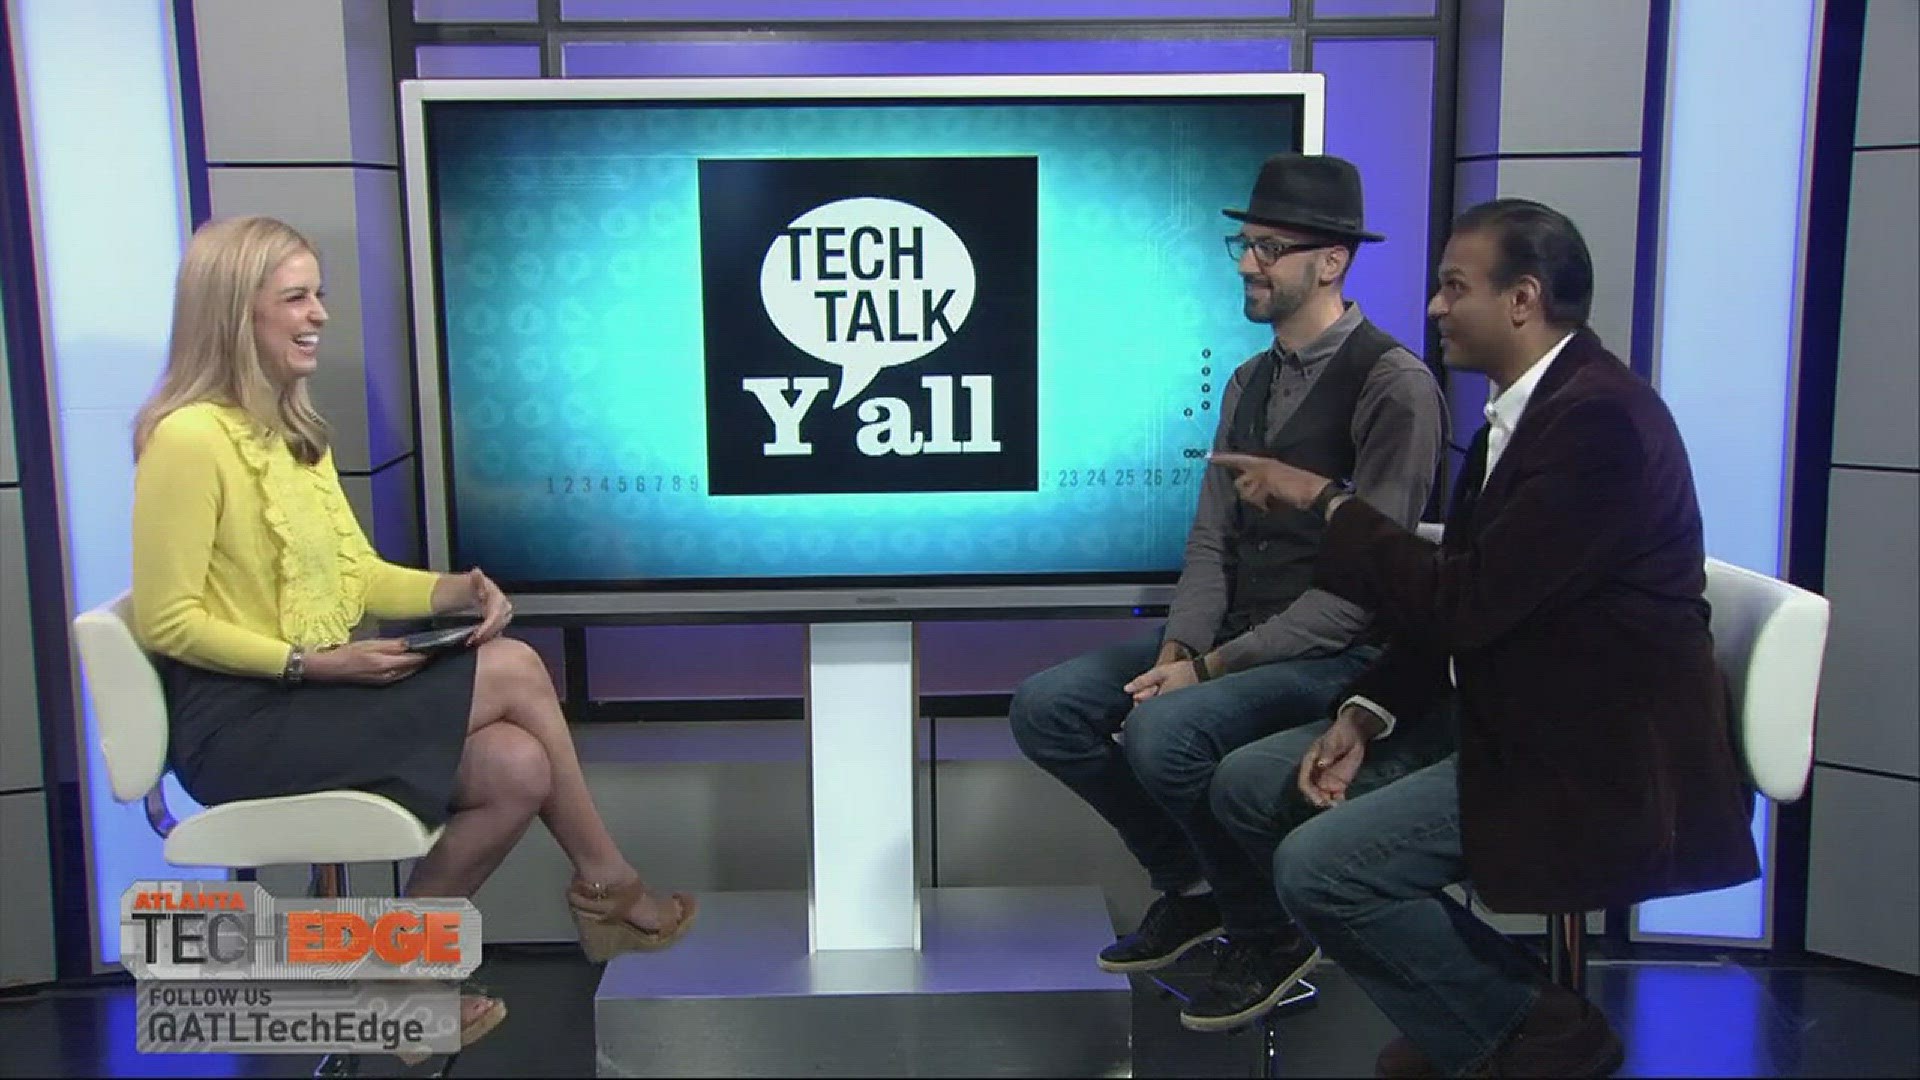 Host Cara Kneer chats with the guys who host "Talk Tech Y'all"